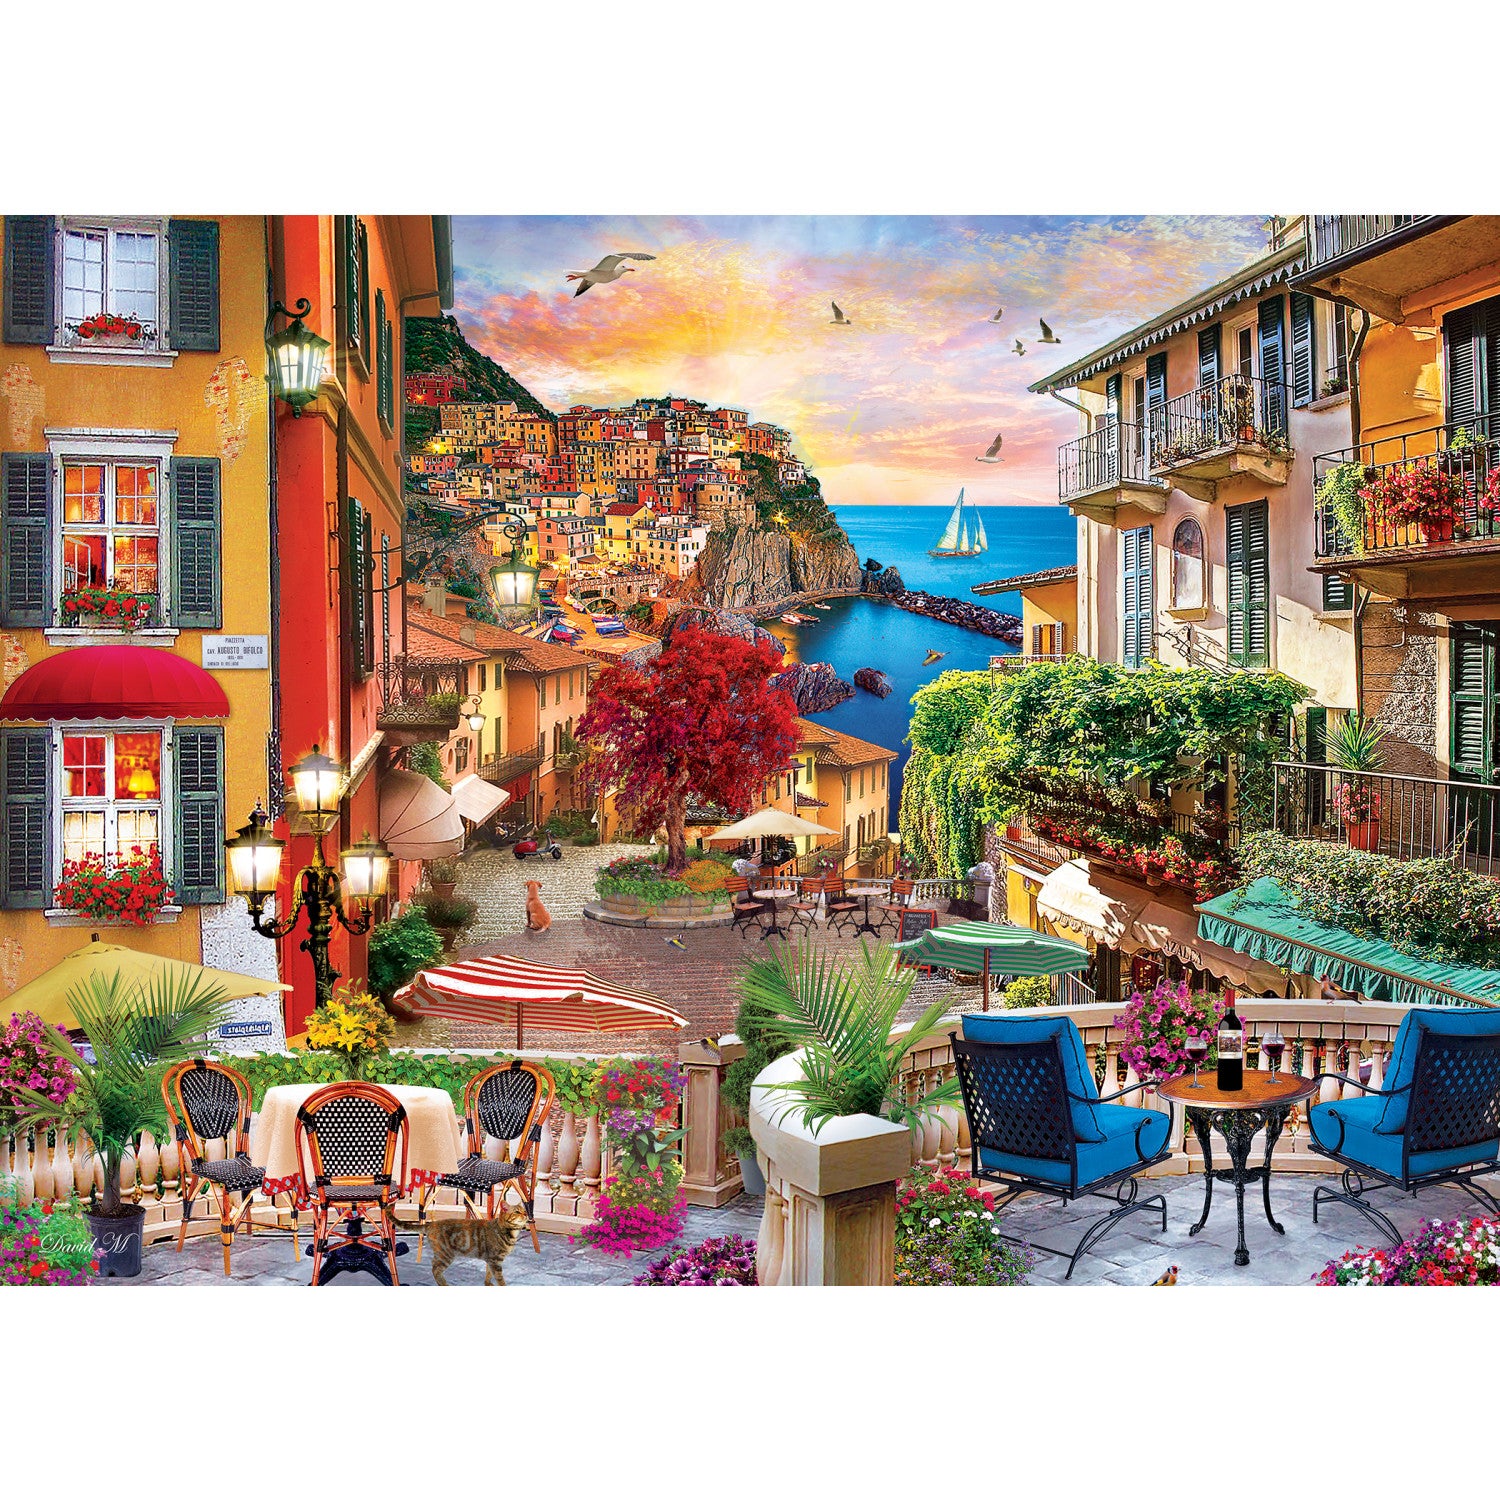 Travel Diary - Italian Afternoon 500 Piece Puzzle